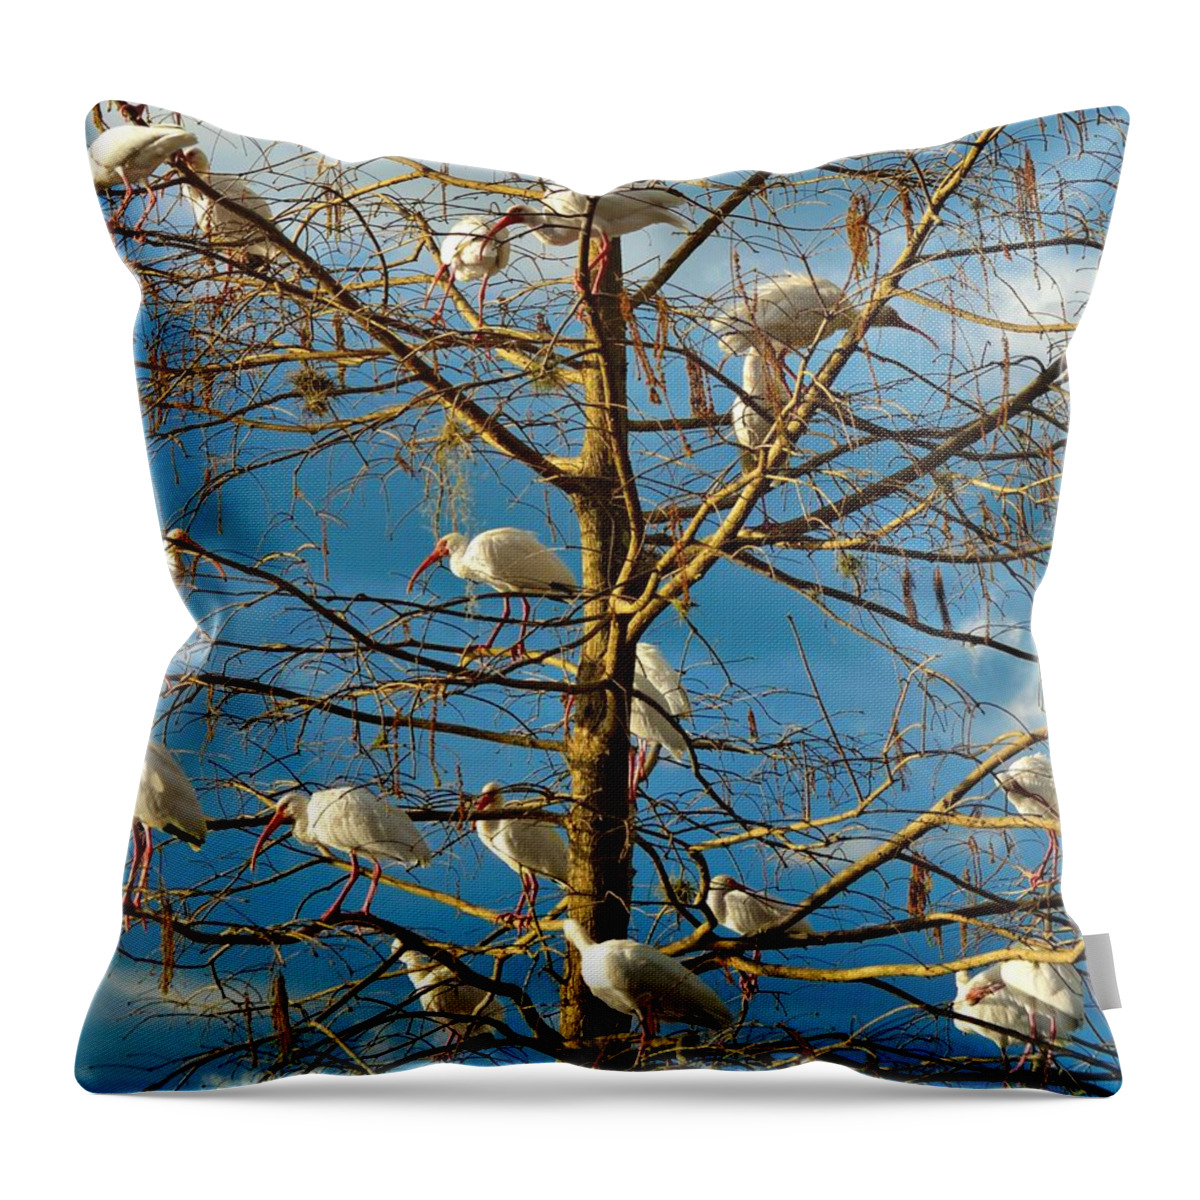 White Ibis Throw Pillow featuring the photograph Dr. Seuss by Carolyn Mickulas